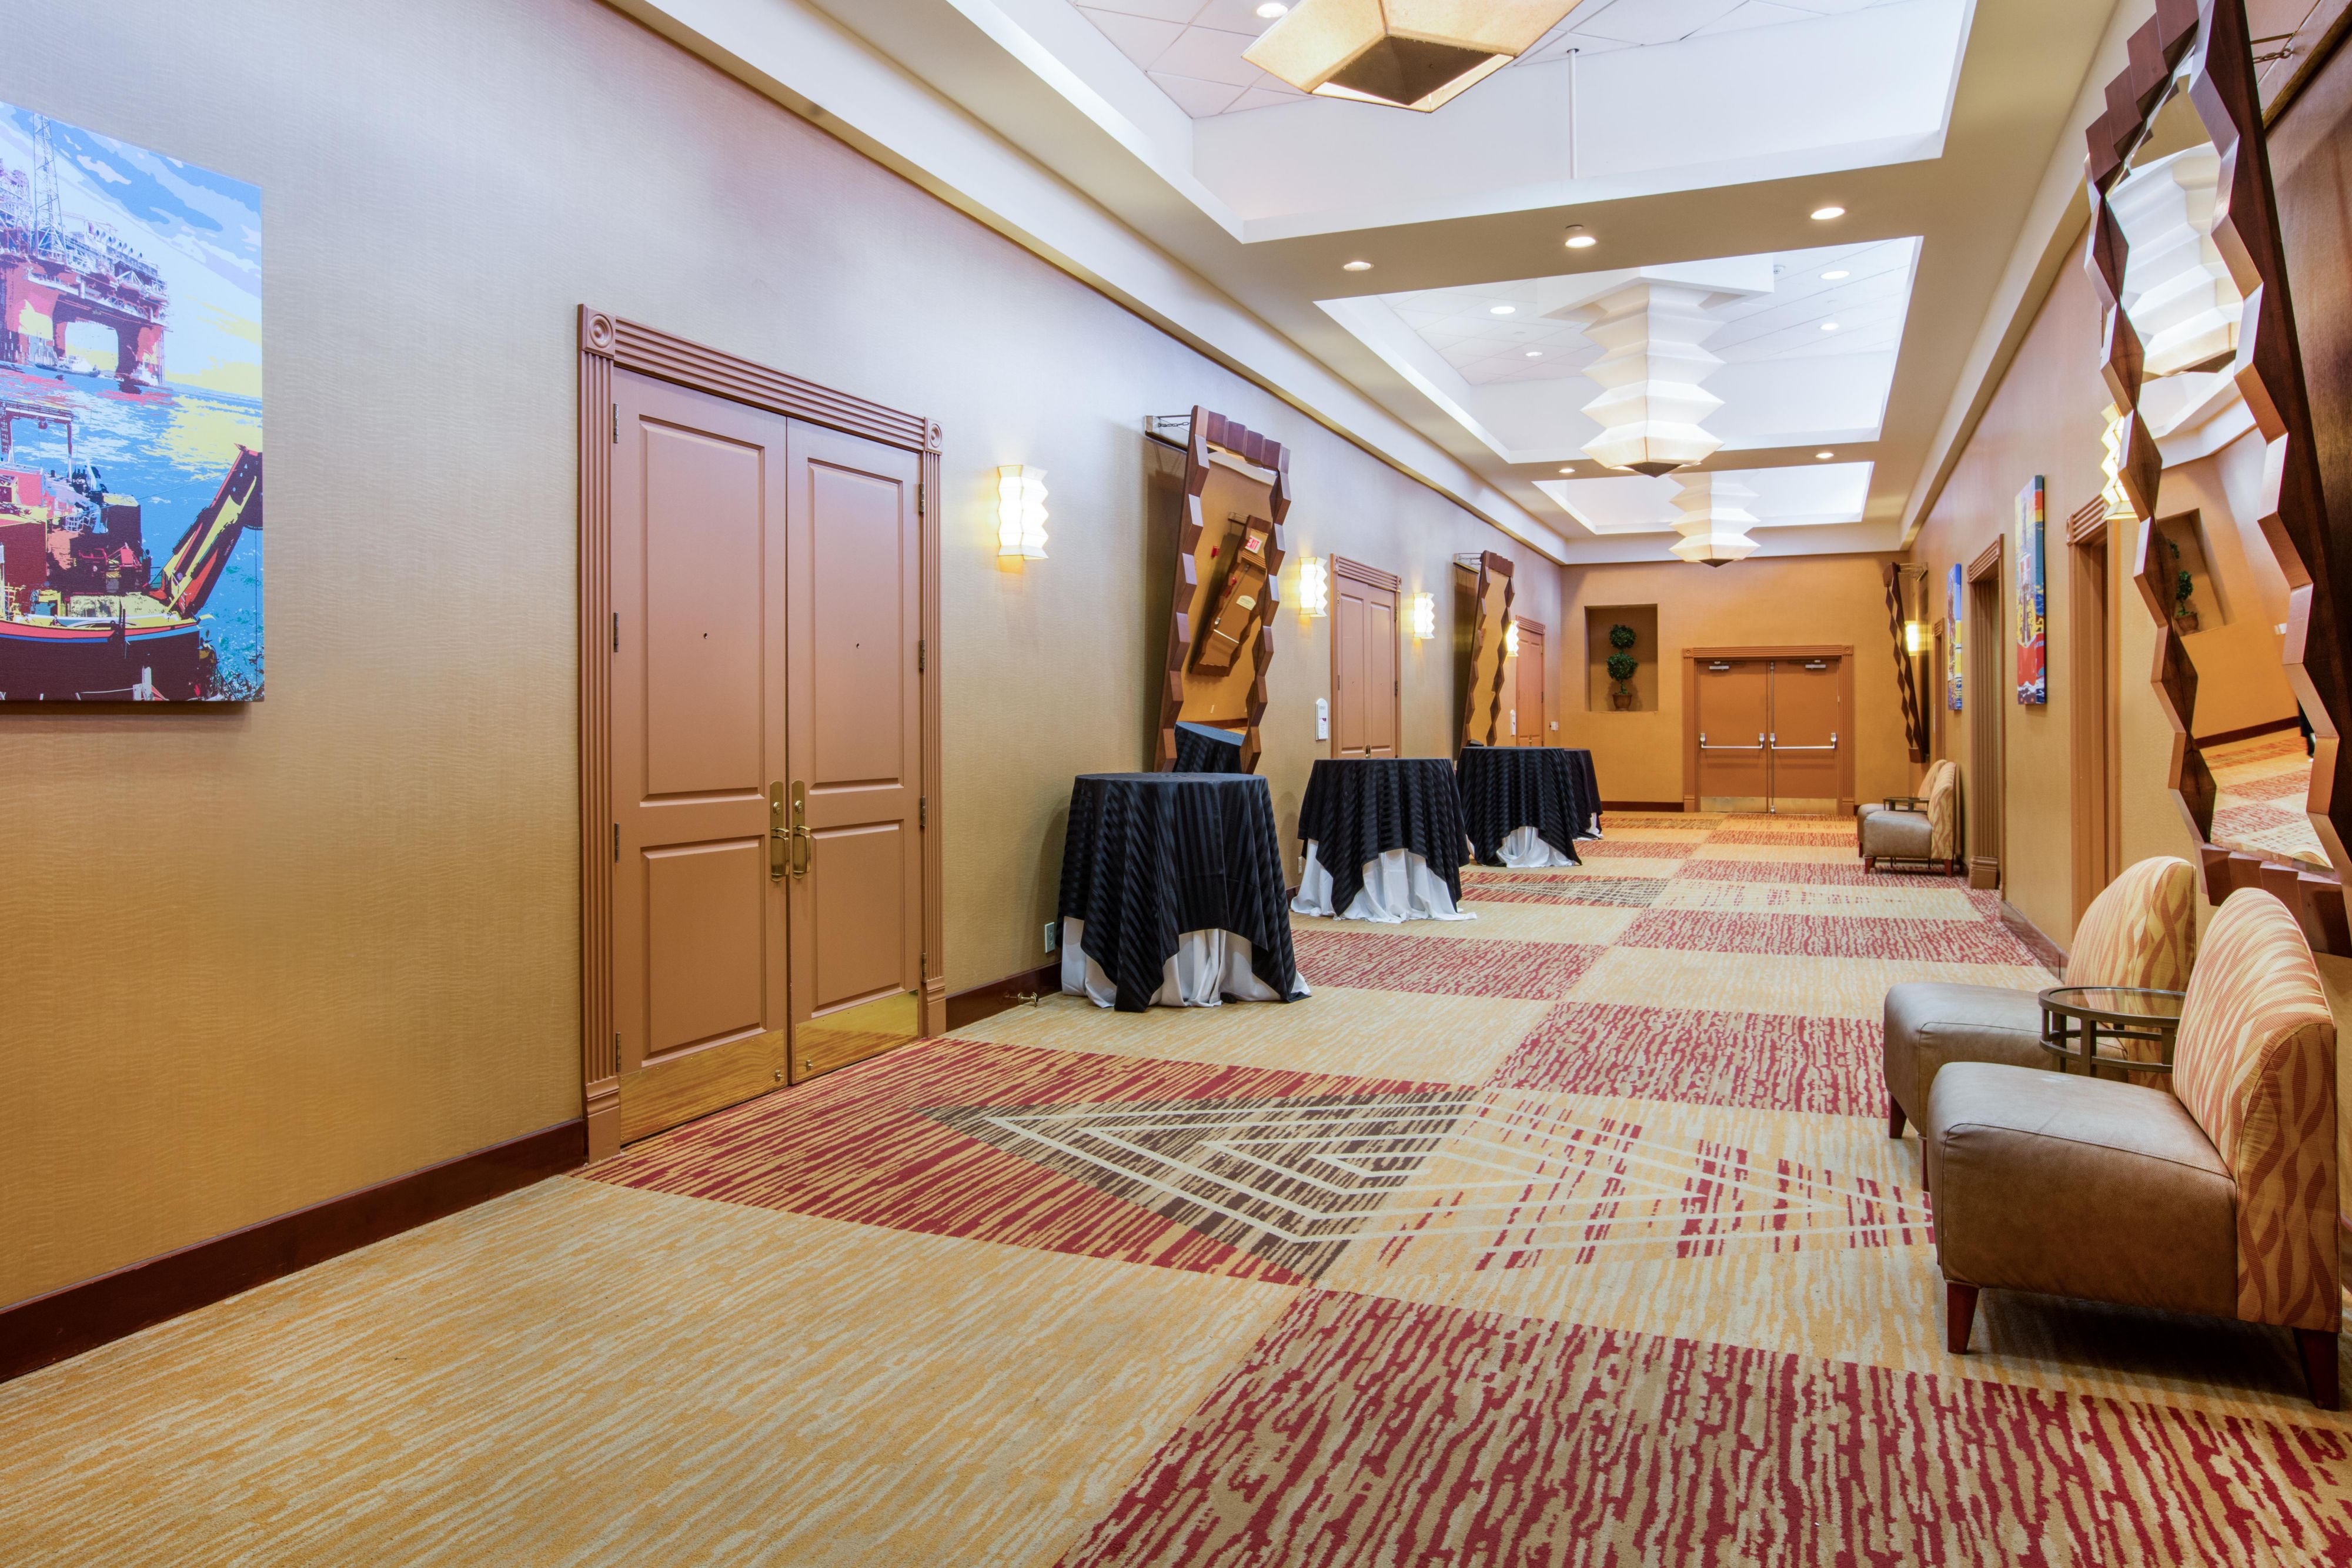 The ballroom foyer can be set up for breaks and meals.